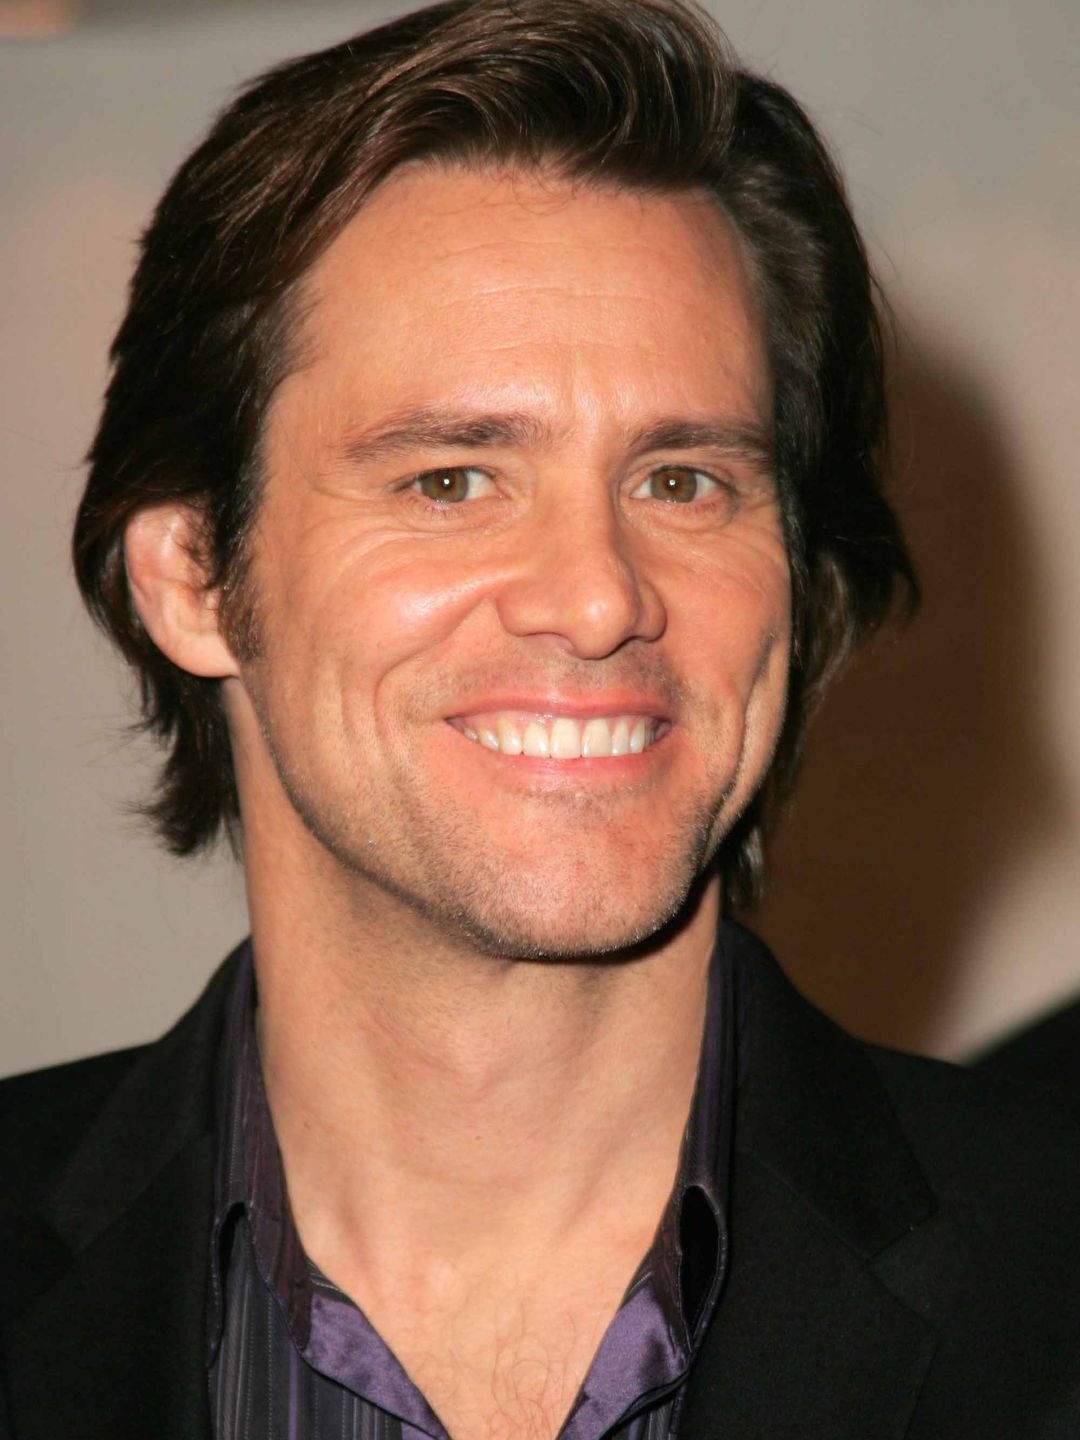 Jim Carrey how did he became famous